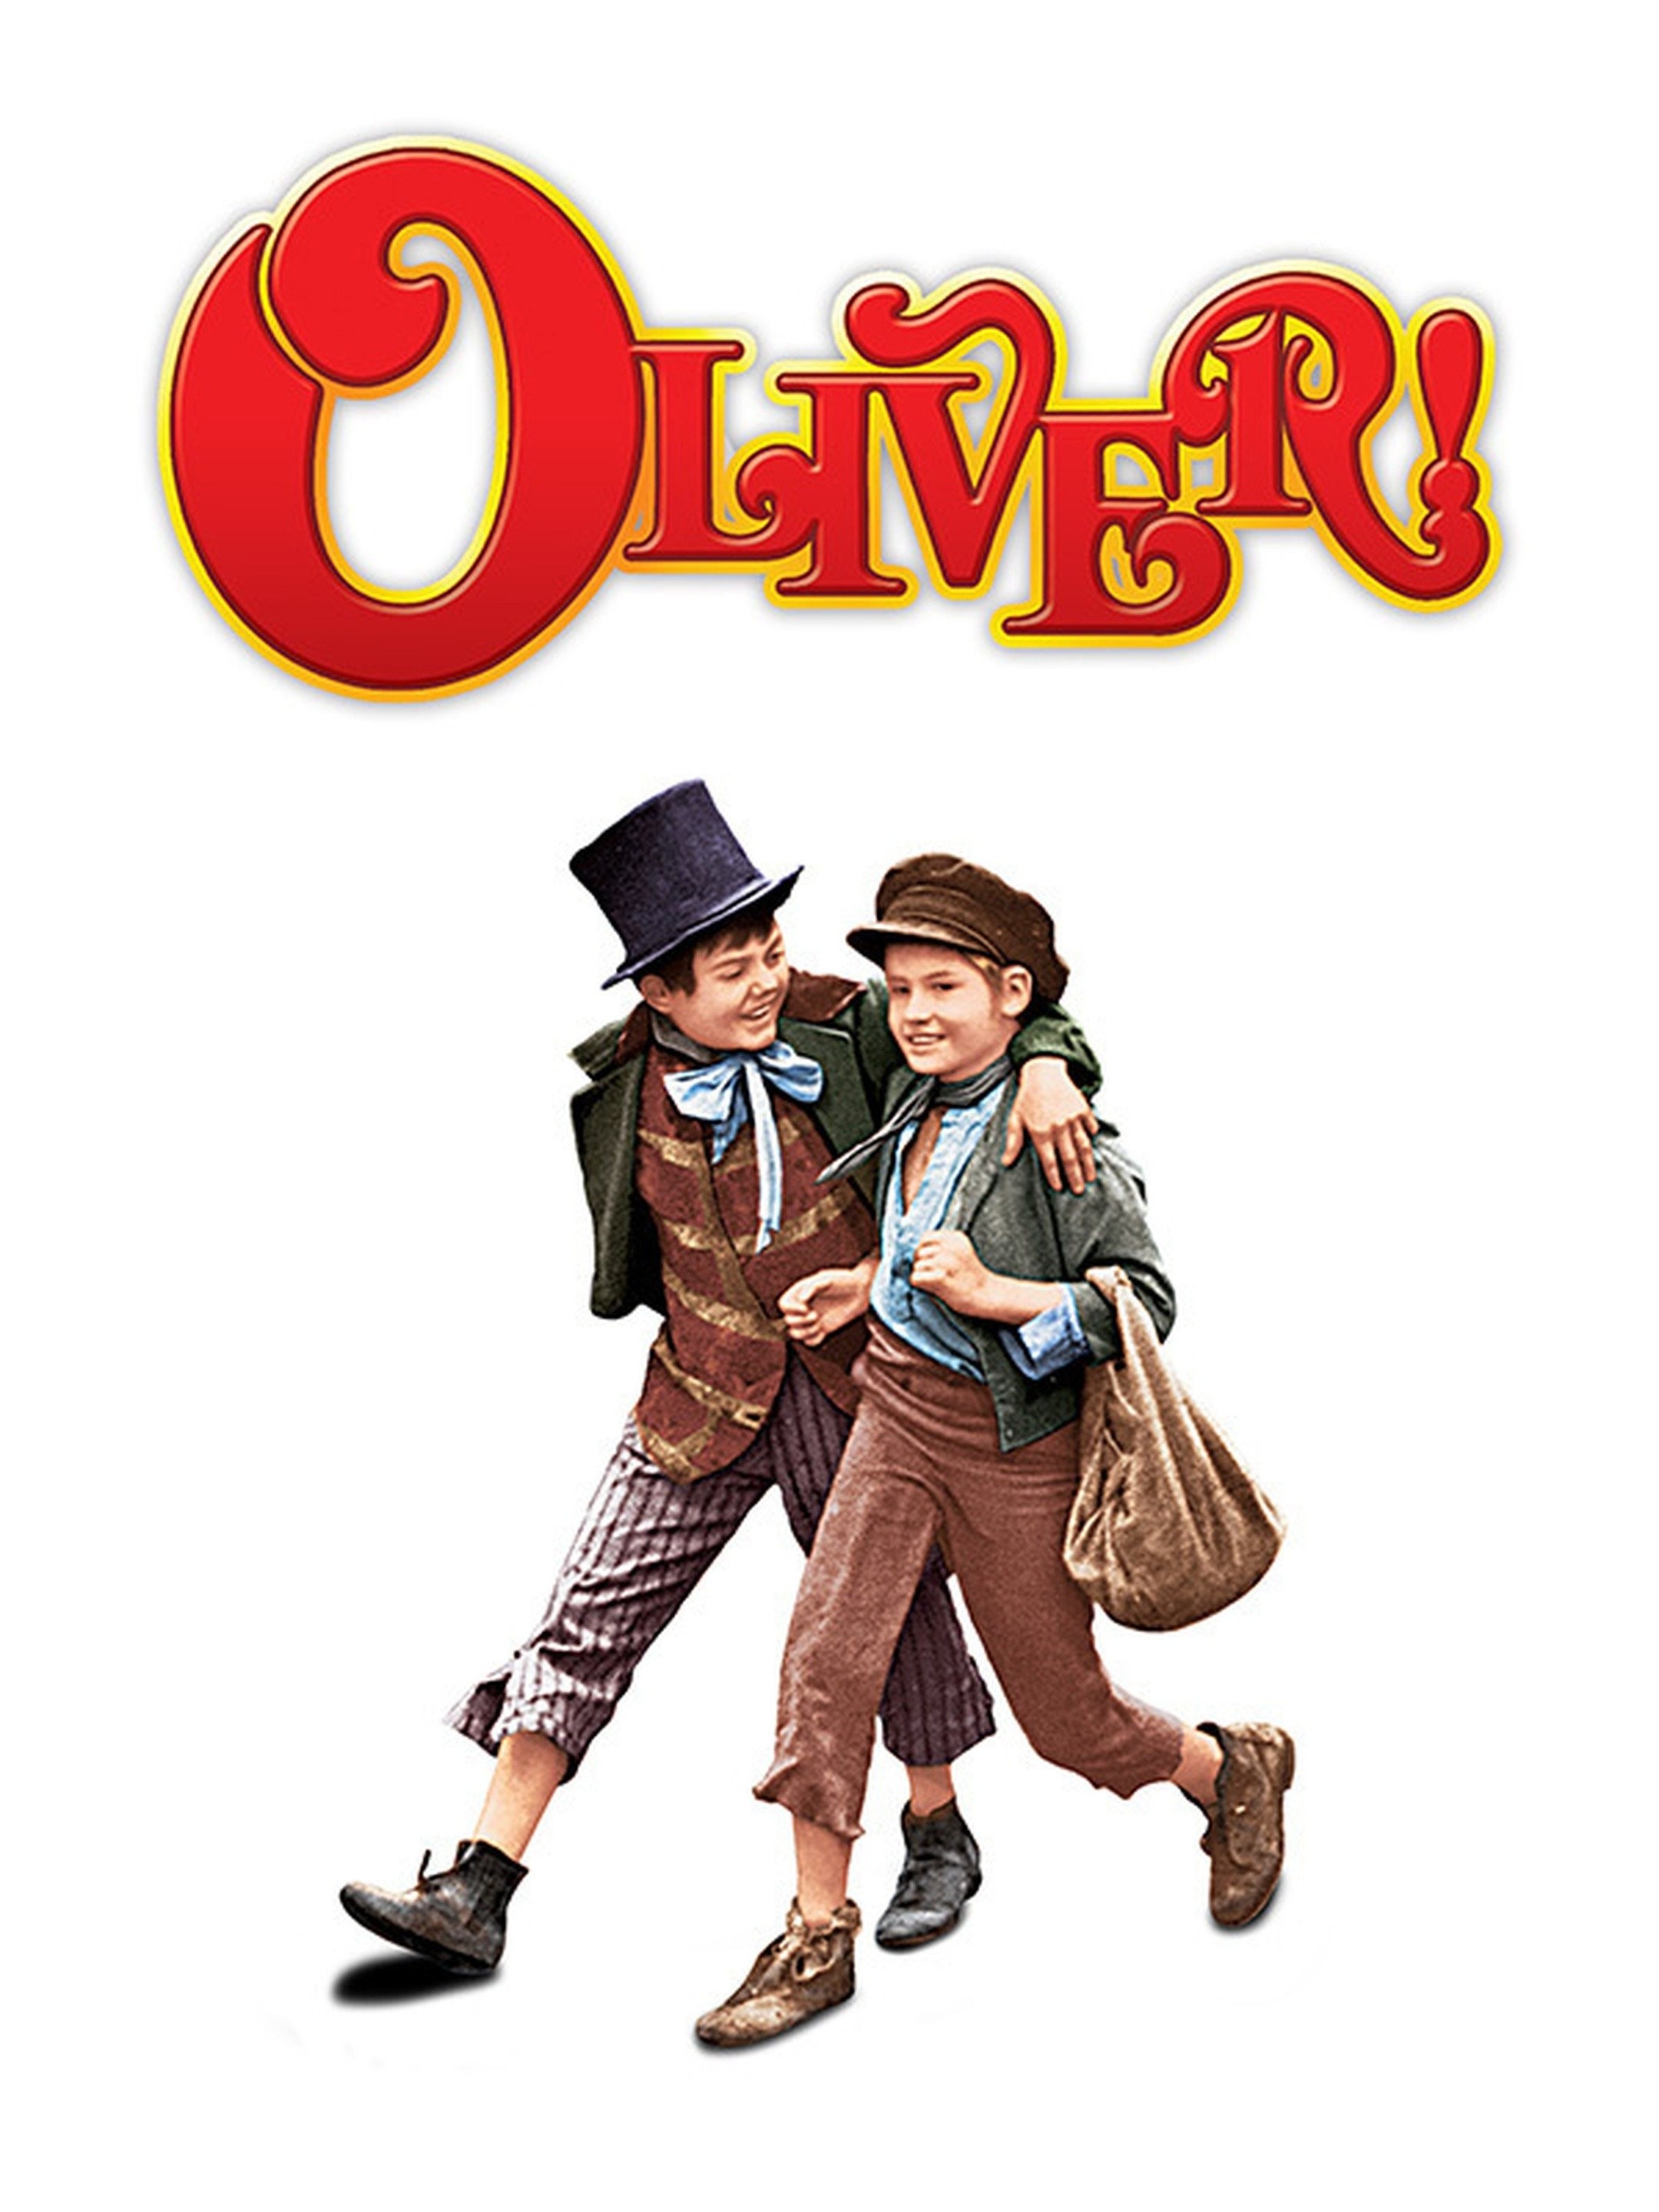 Oliver! - Rotten Tomatoes